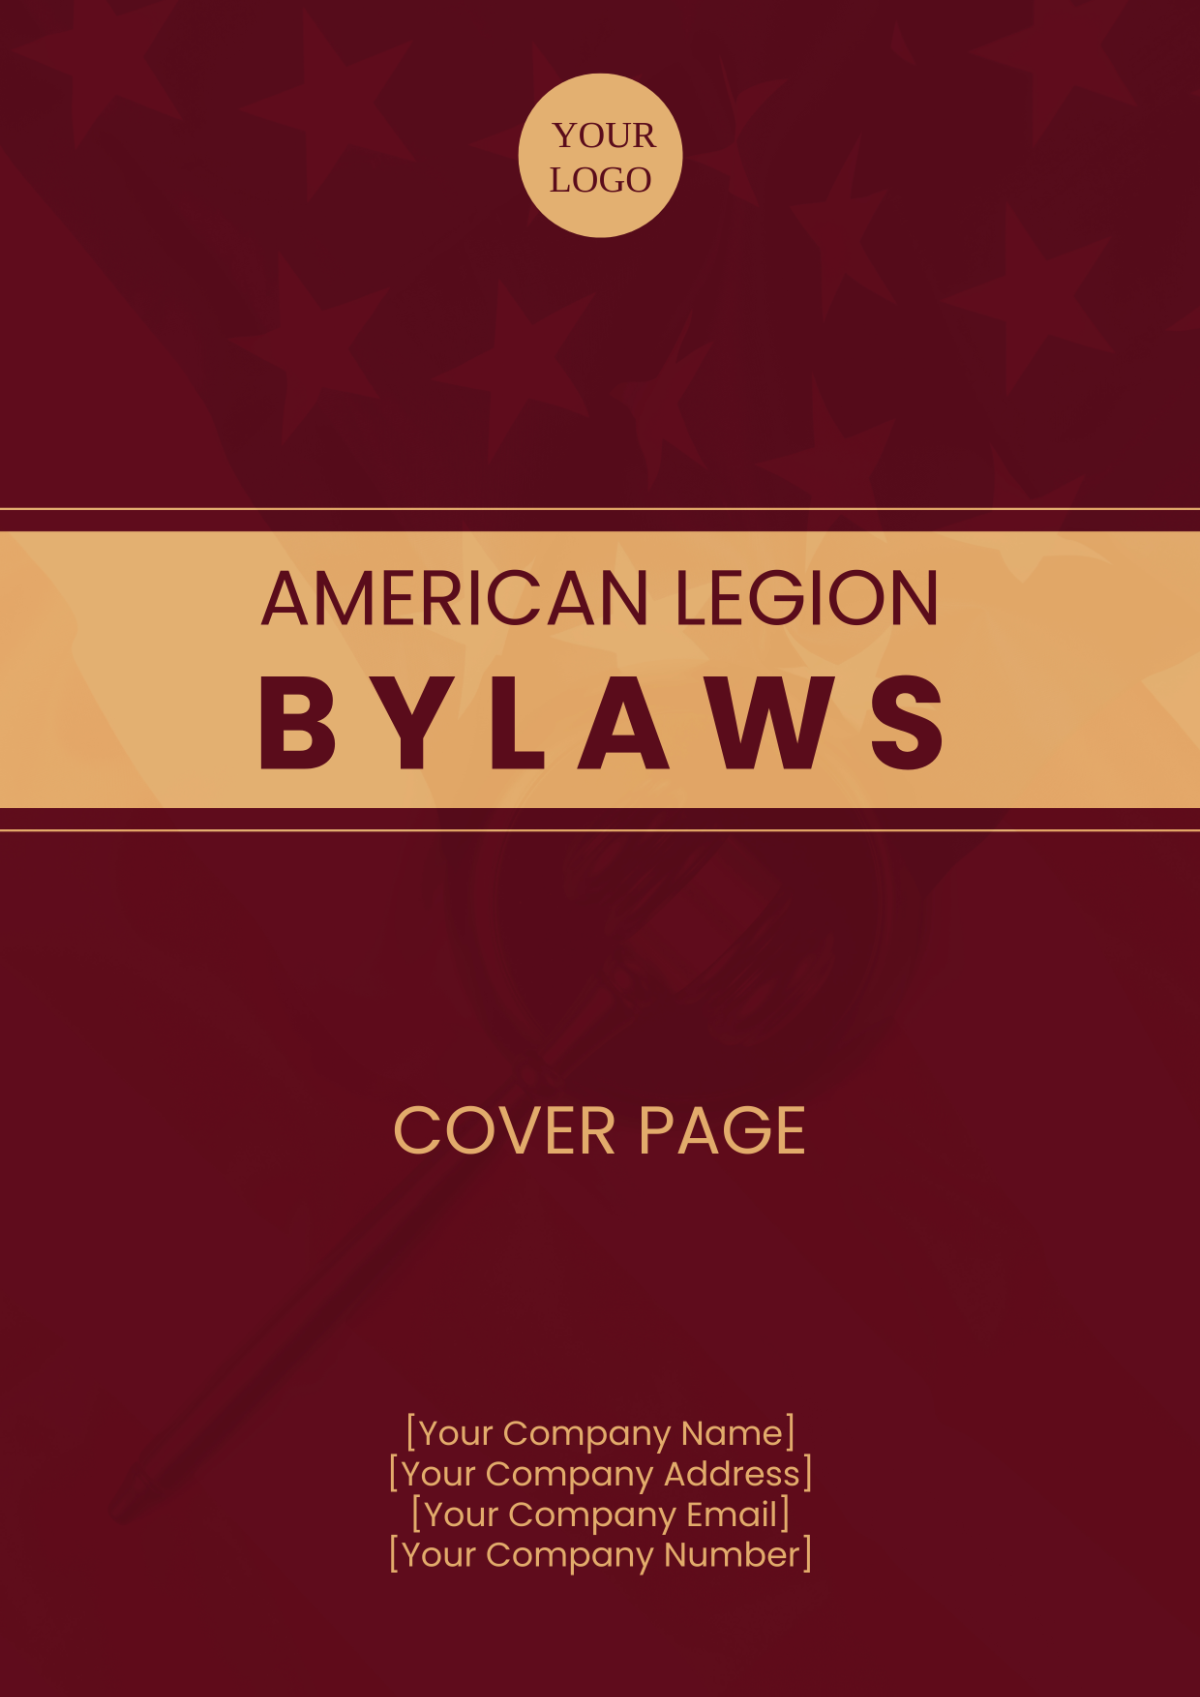 American Legion Bylaws Cover Page